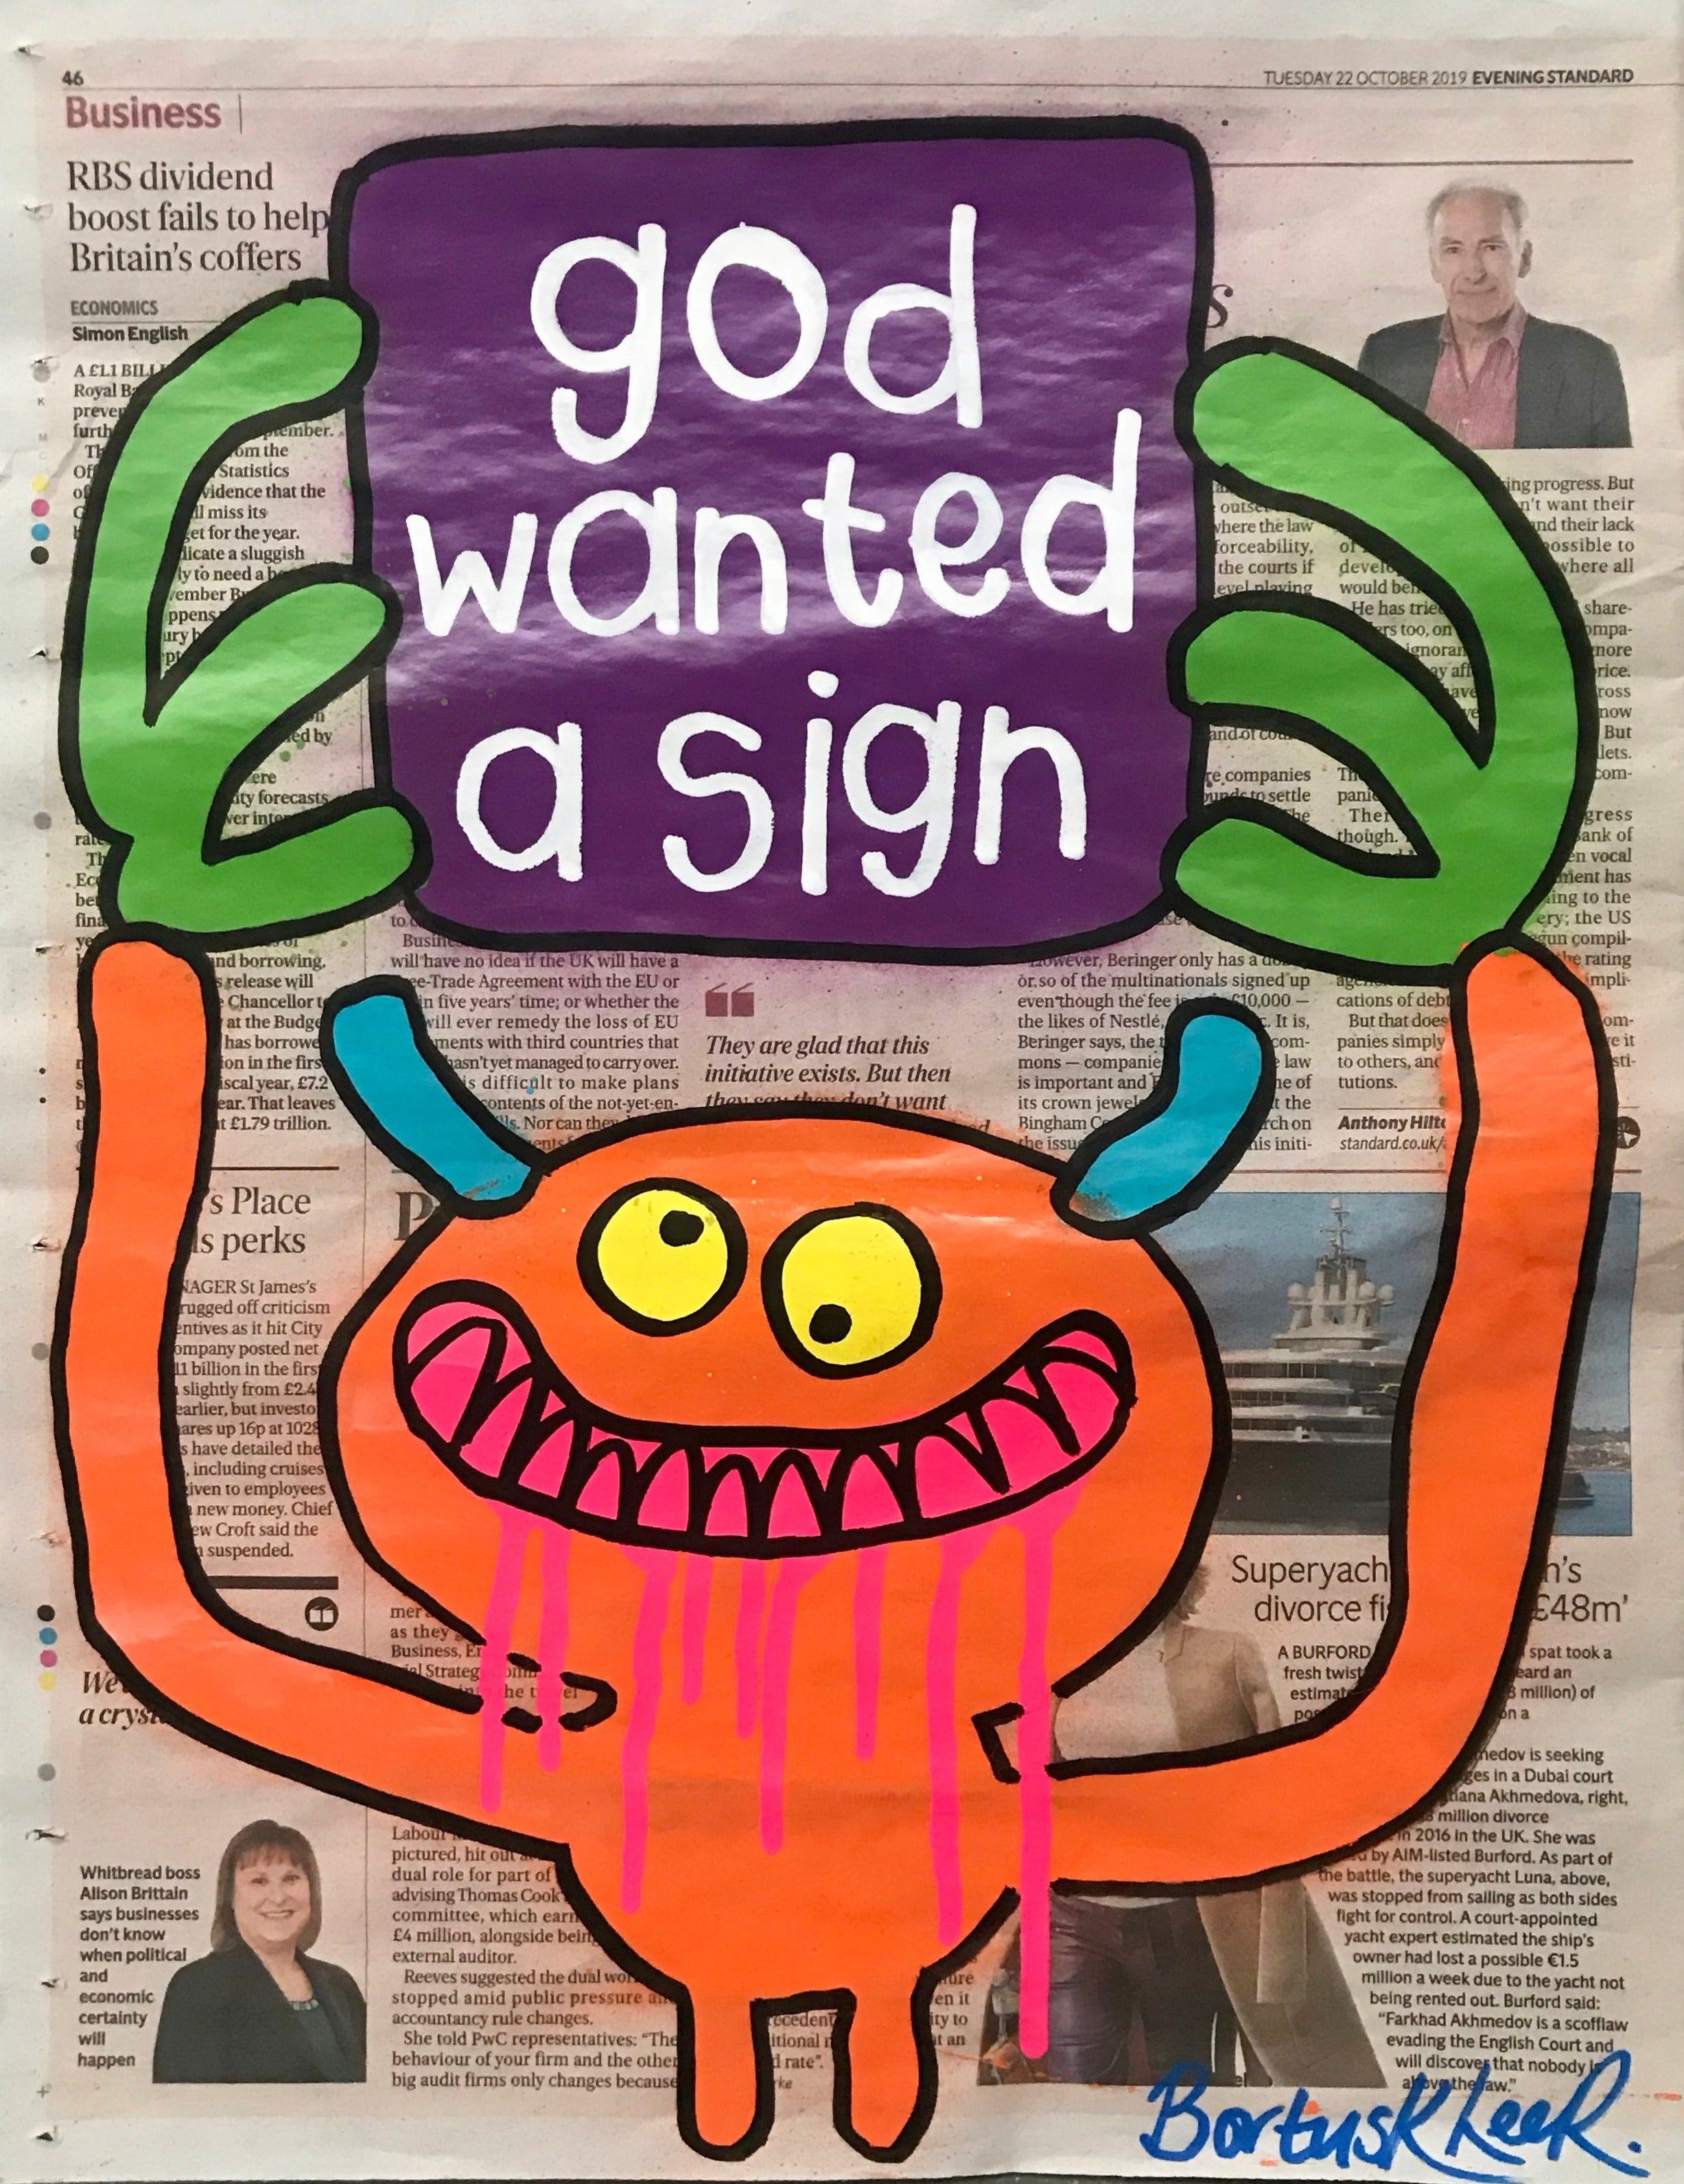 God wanted a sign